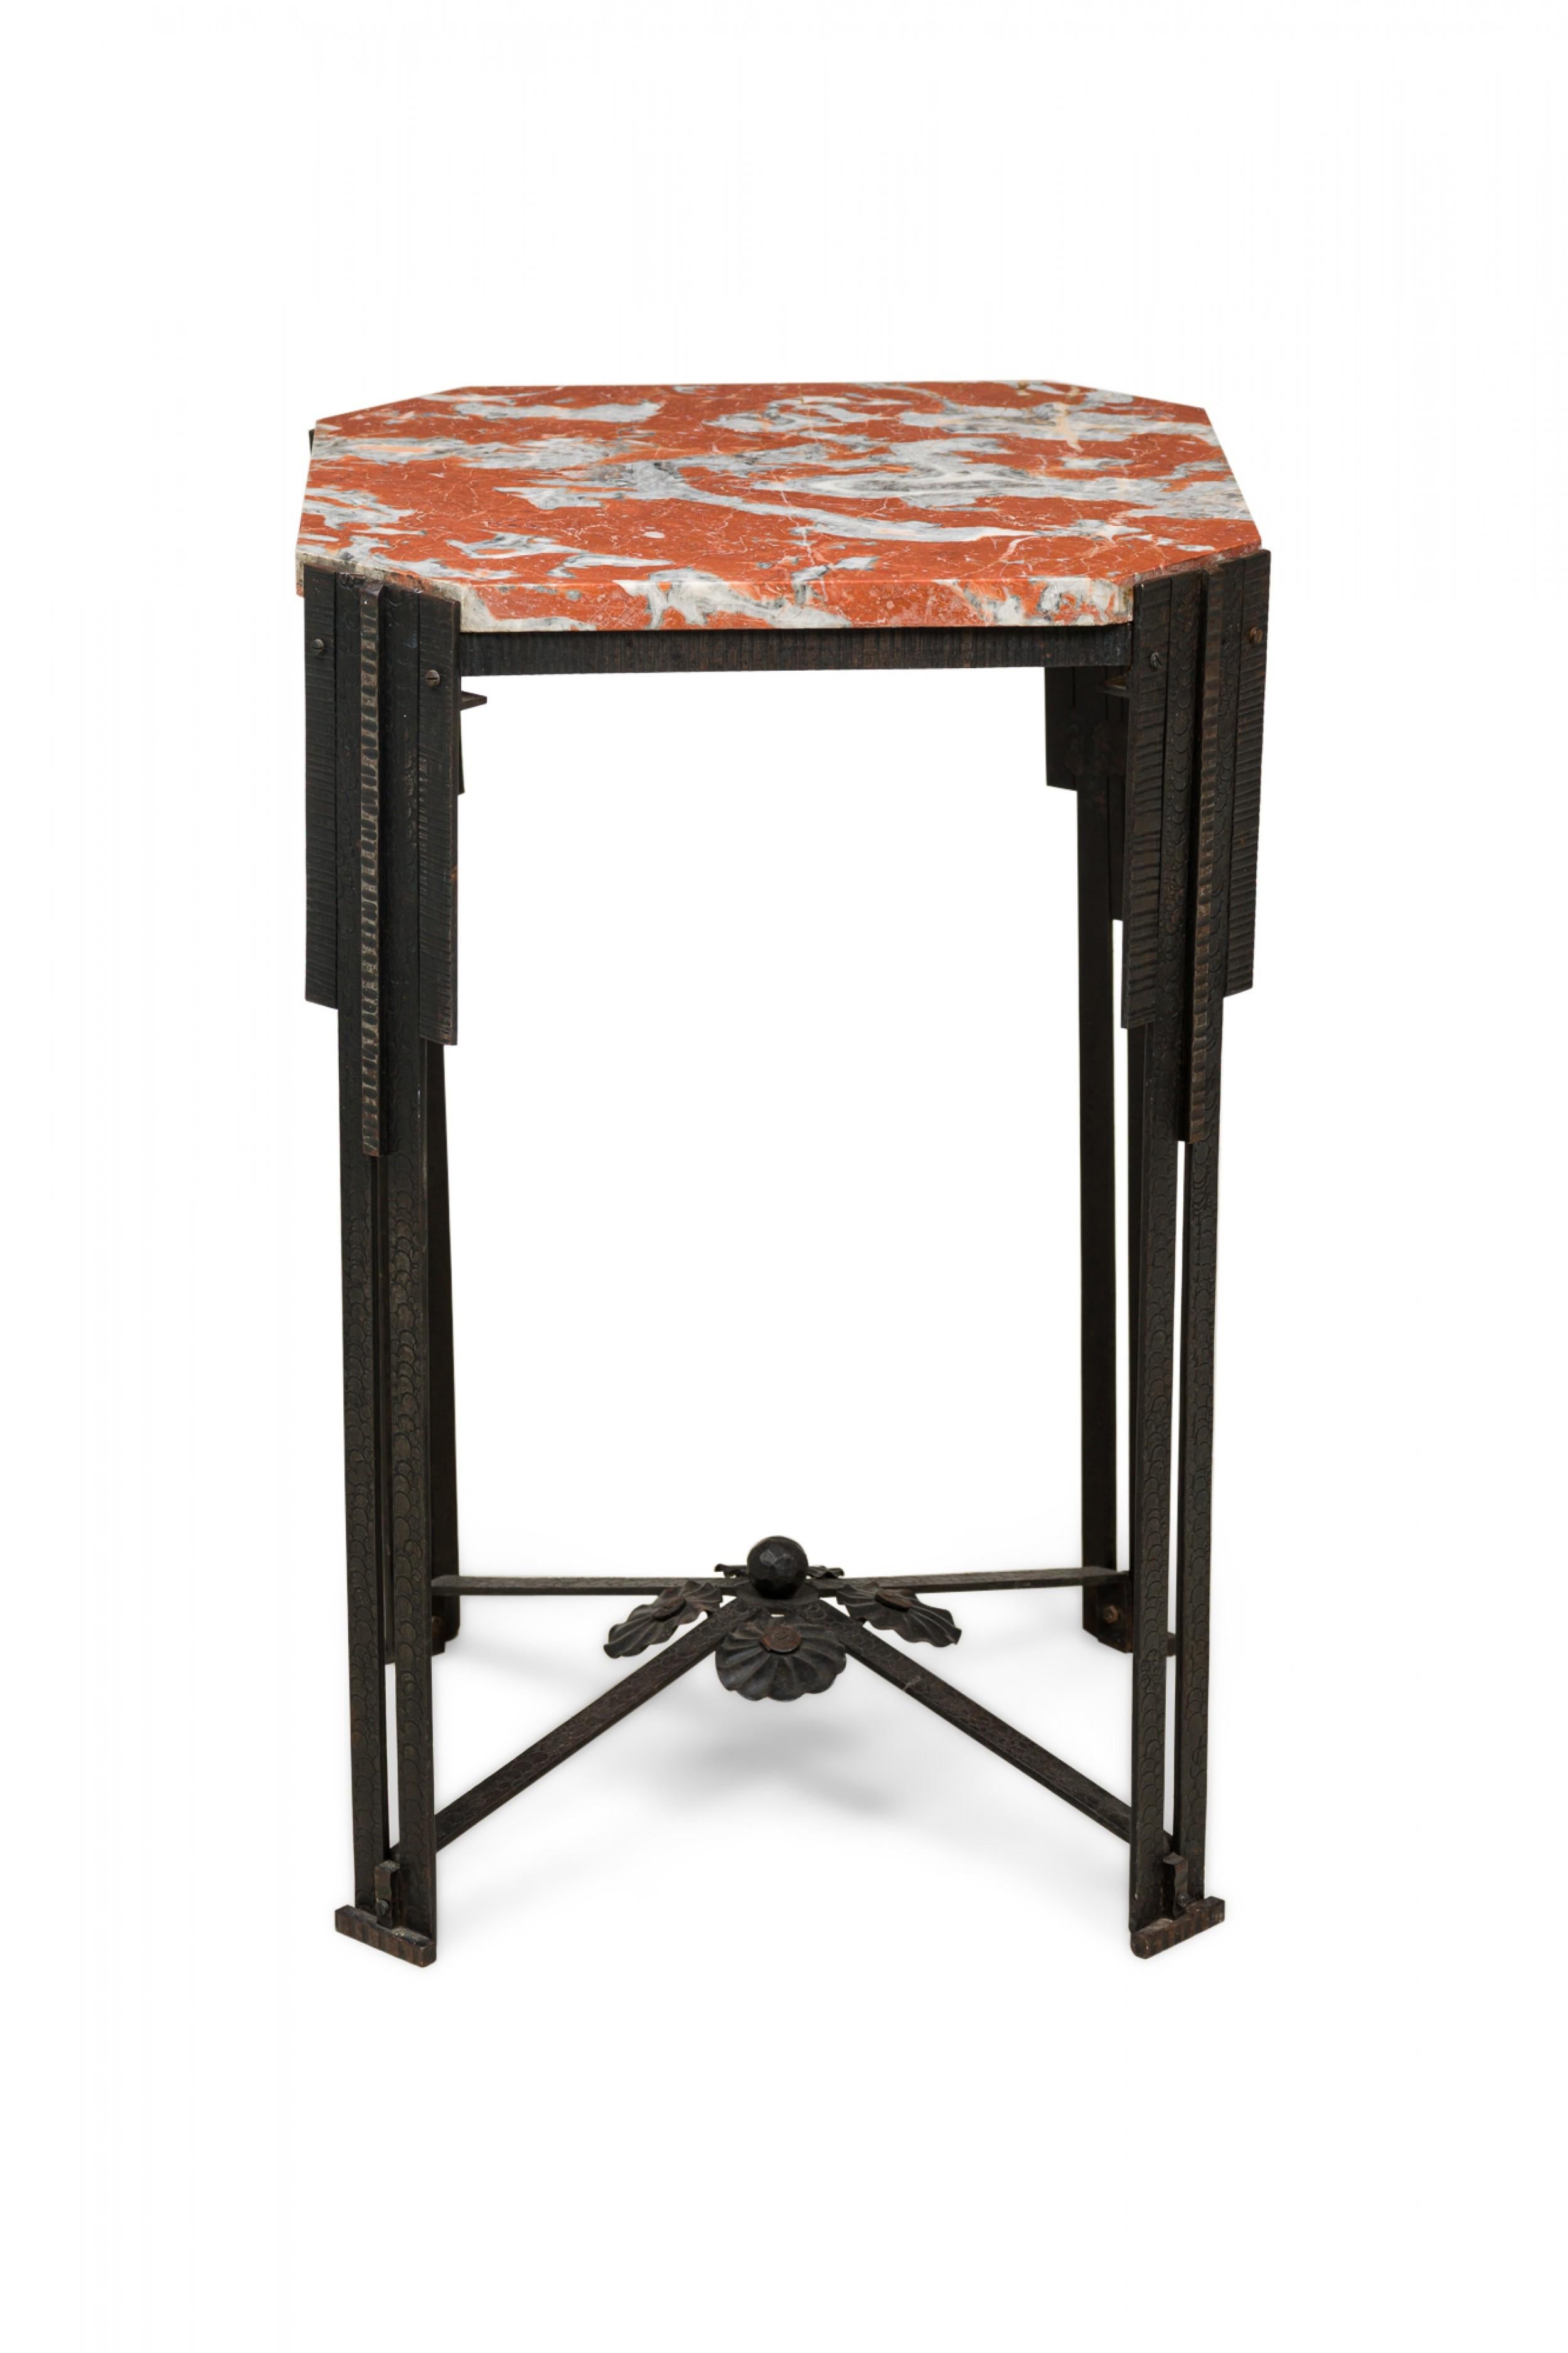 French Art Deco (1930s) end / side / occasional table with a hammered steel metal frame connected at the base by an \